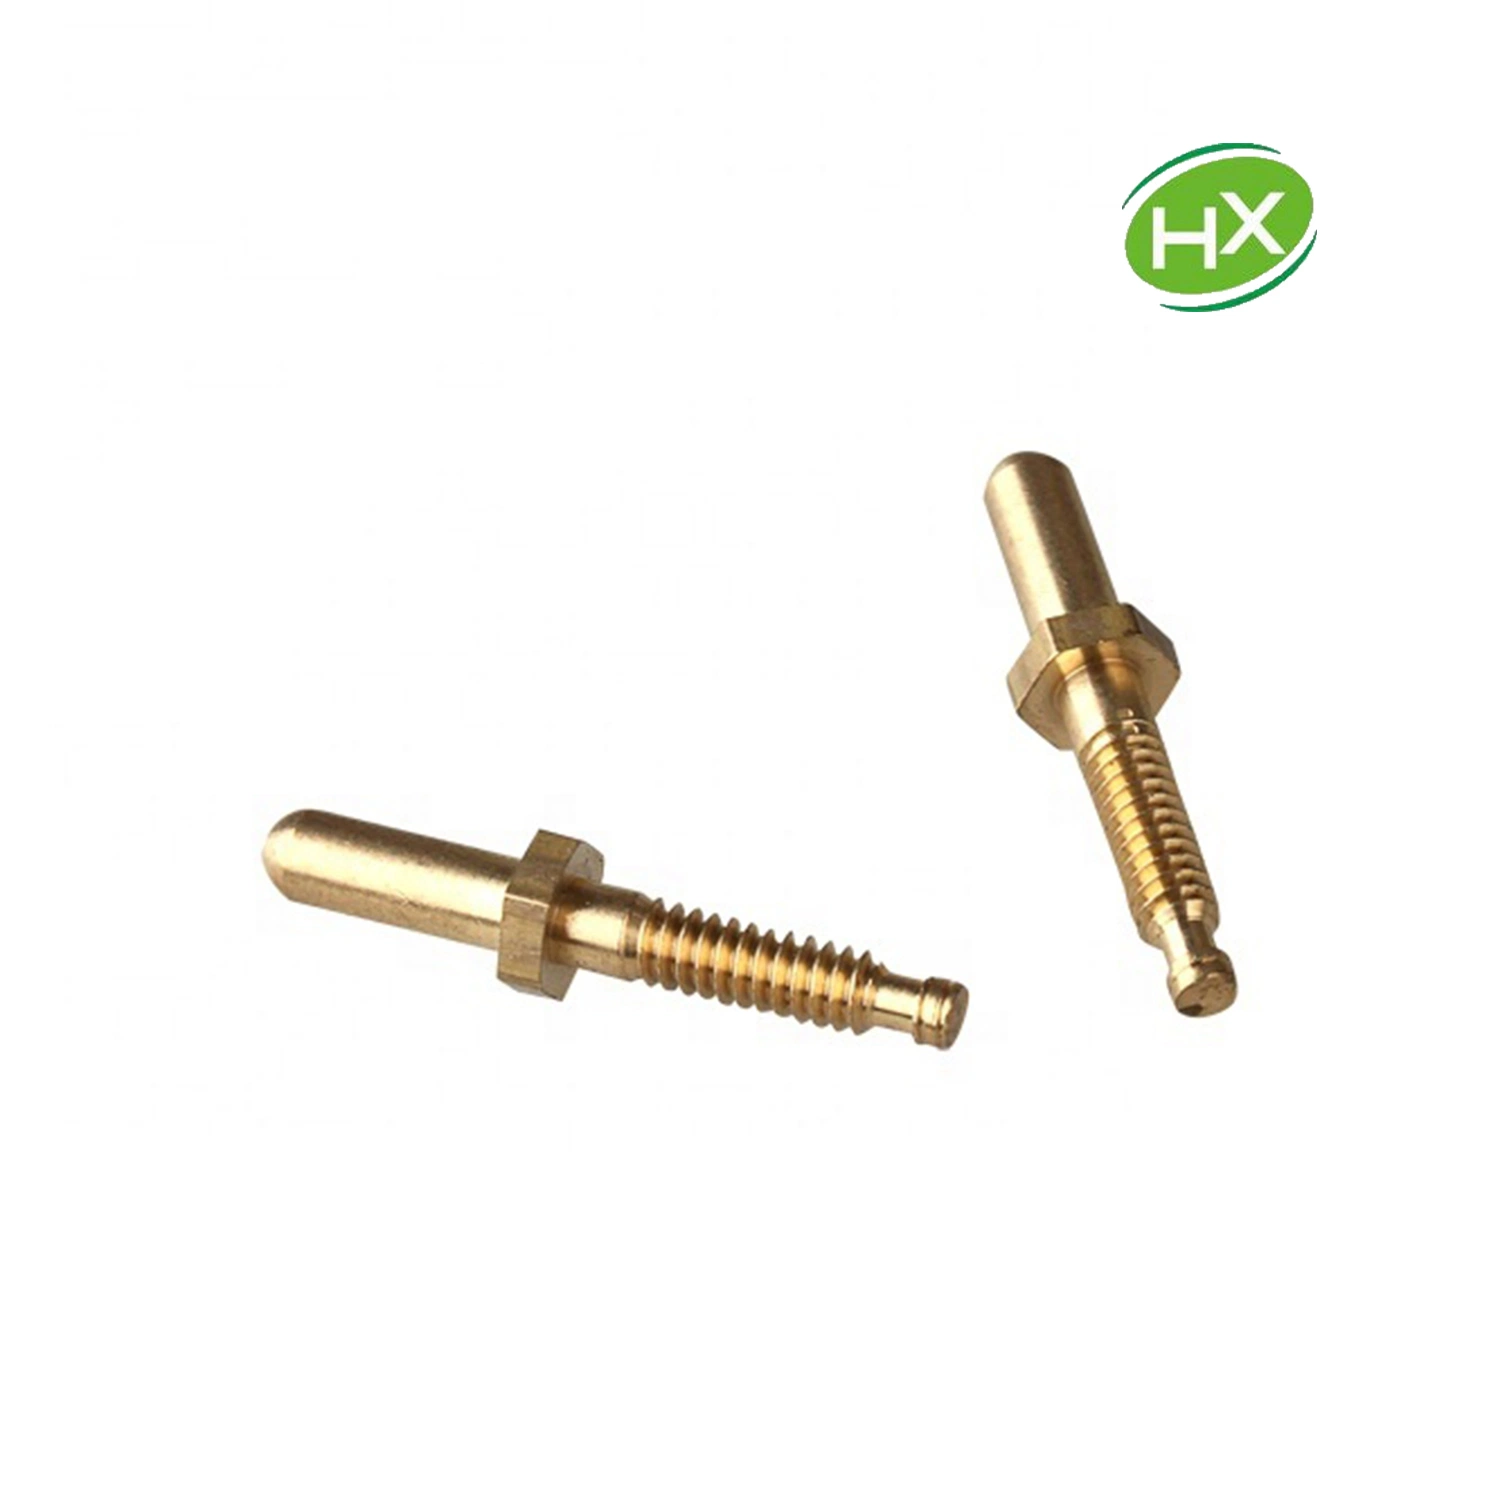 CNC Machine Brass/Copper with Casting Motorcycle Accessories/Auto Parts